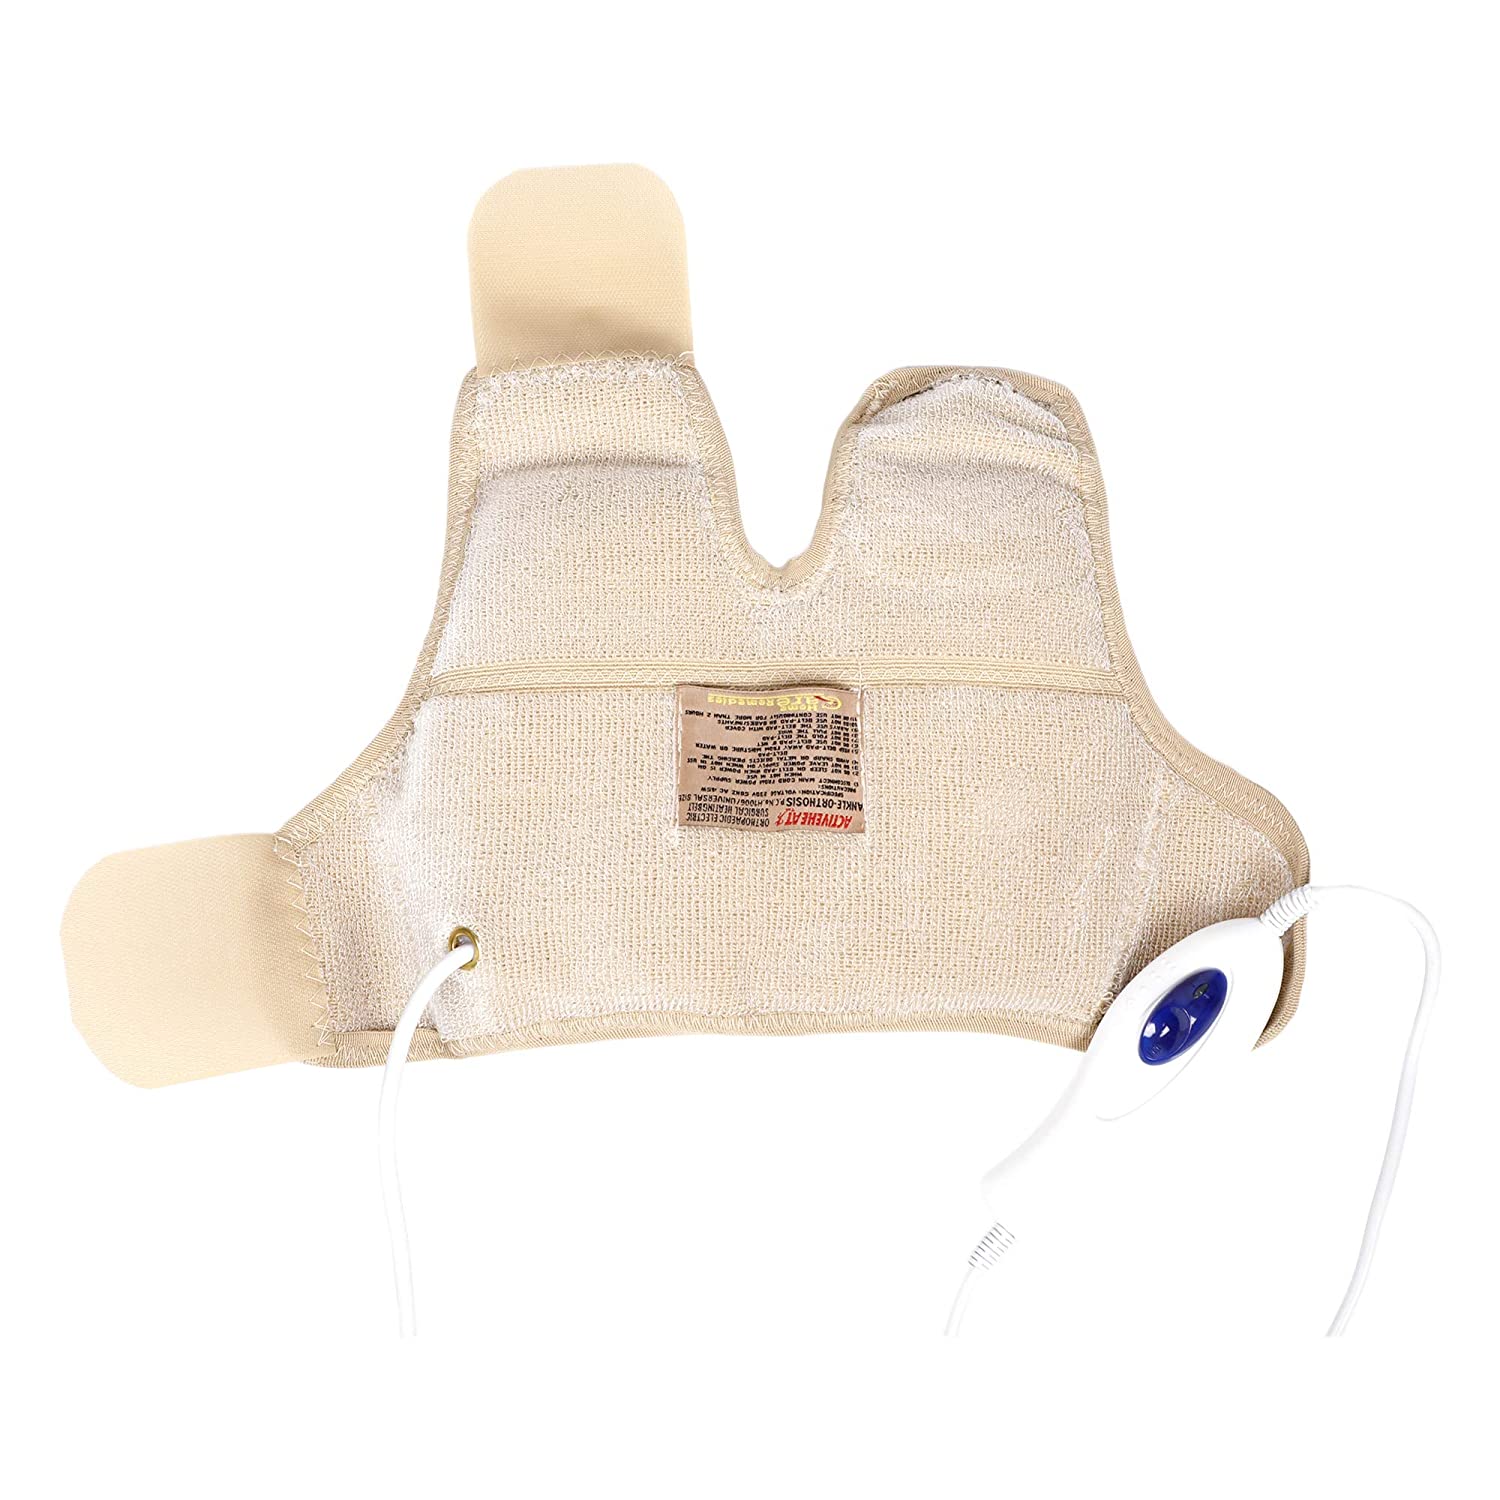 Vissco Ankle Orthosis with Electric Heating Pad - Universal (Skin)